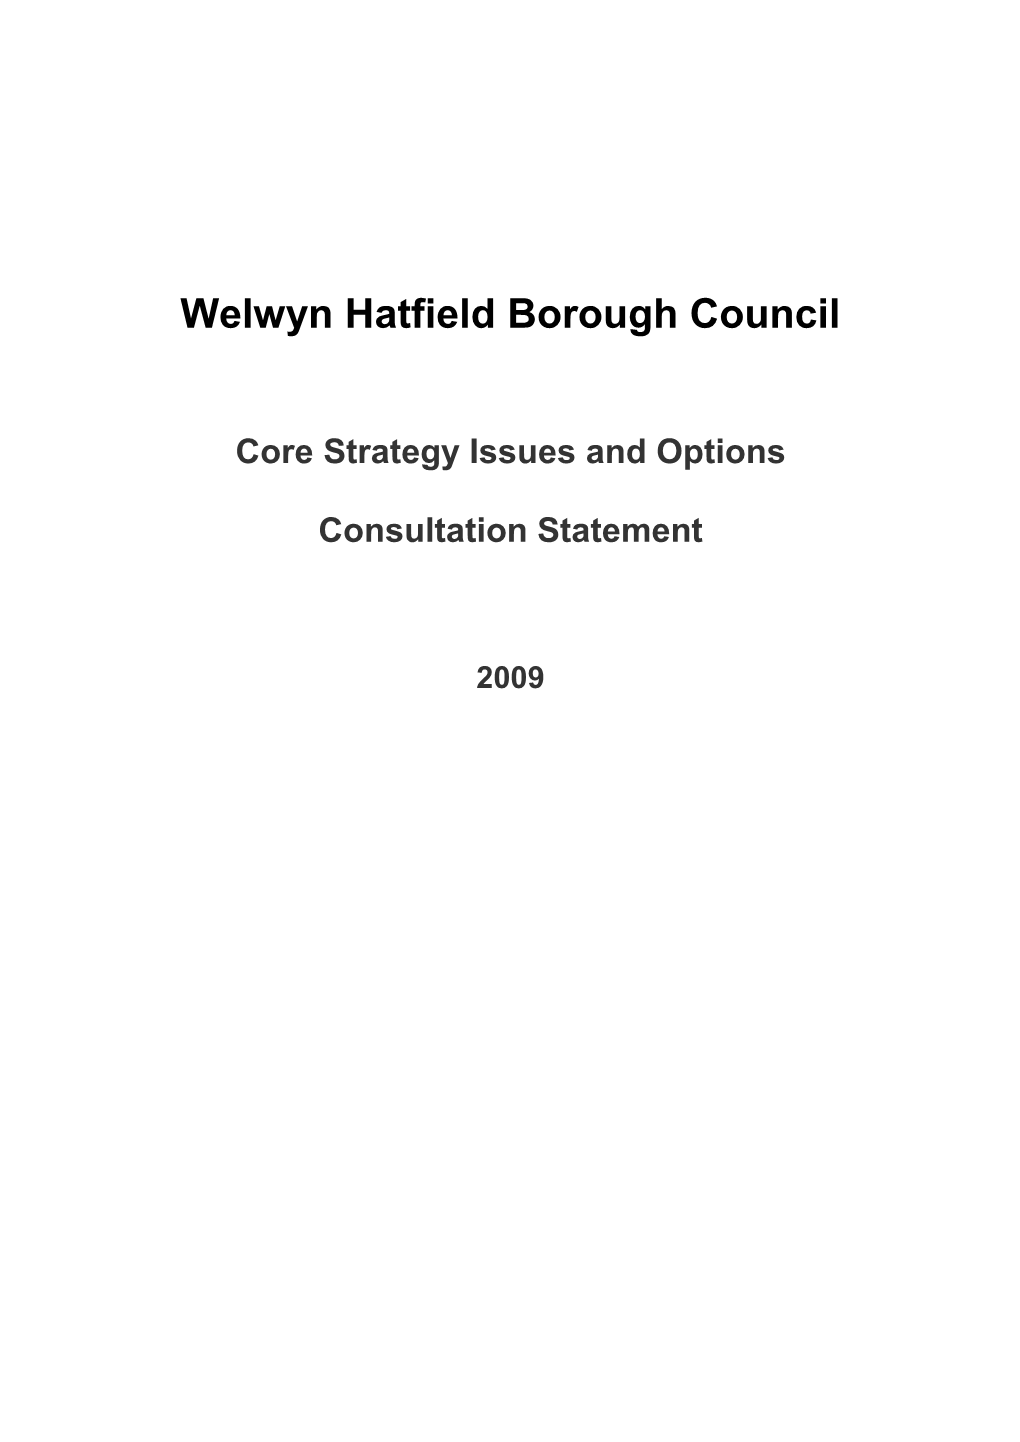 Core Strategy Issues and Options Consultation Statement